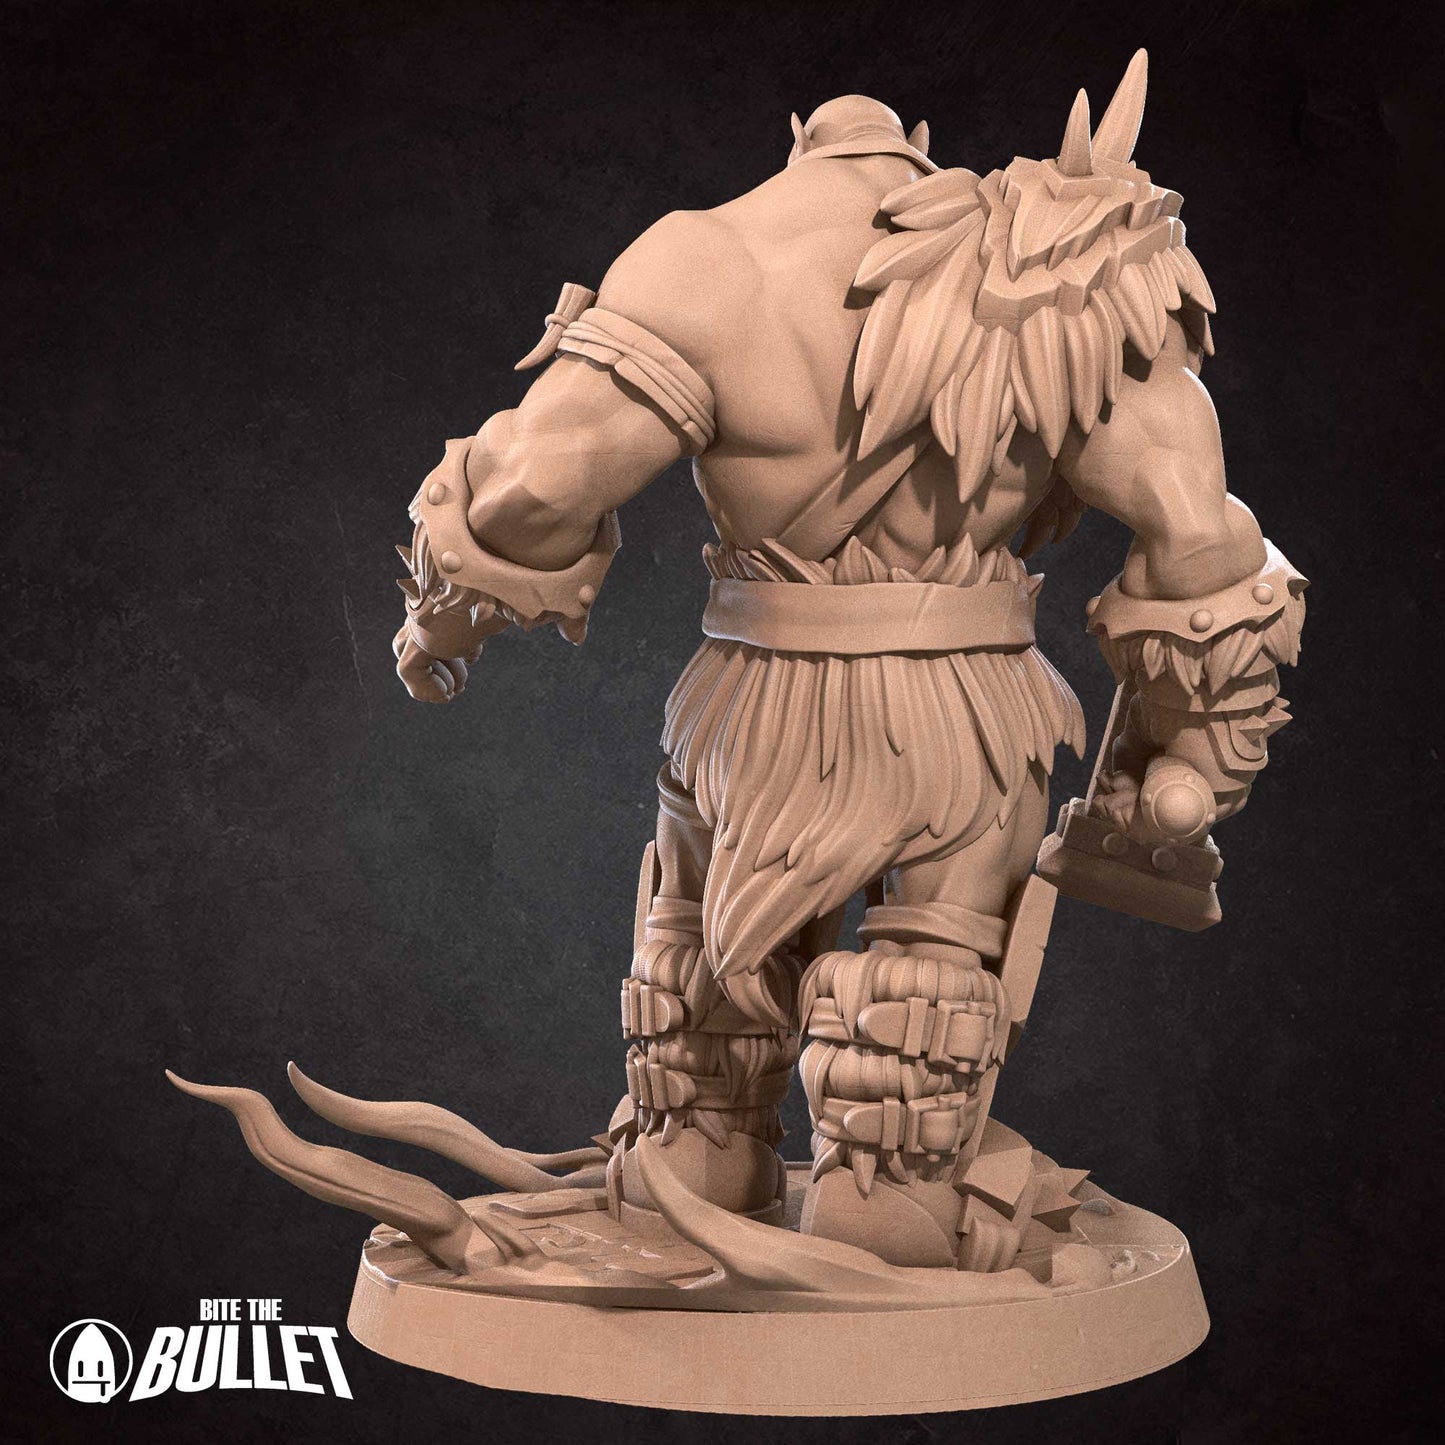 DnD Barbarian - Fighter - Miniature - Orc - Paladin Durgash  Barbarian - Fighter - Miniature - Orc - Paladin sold by DoubleHitShop